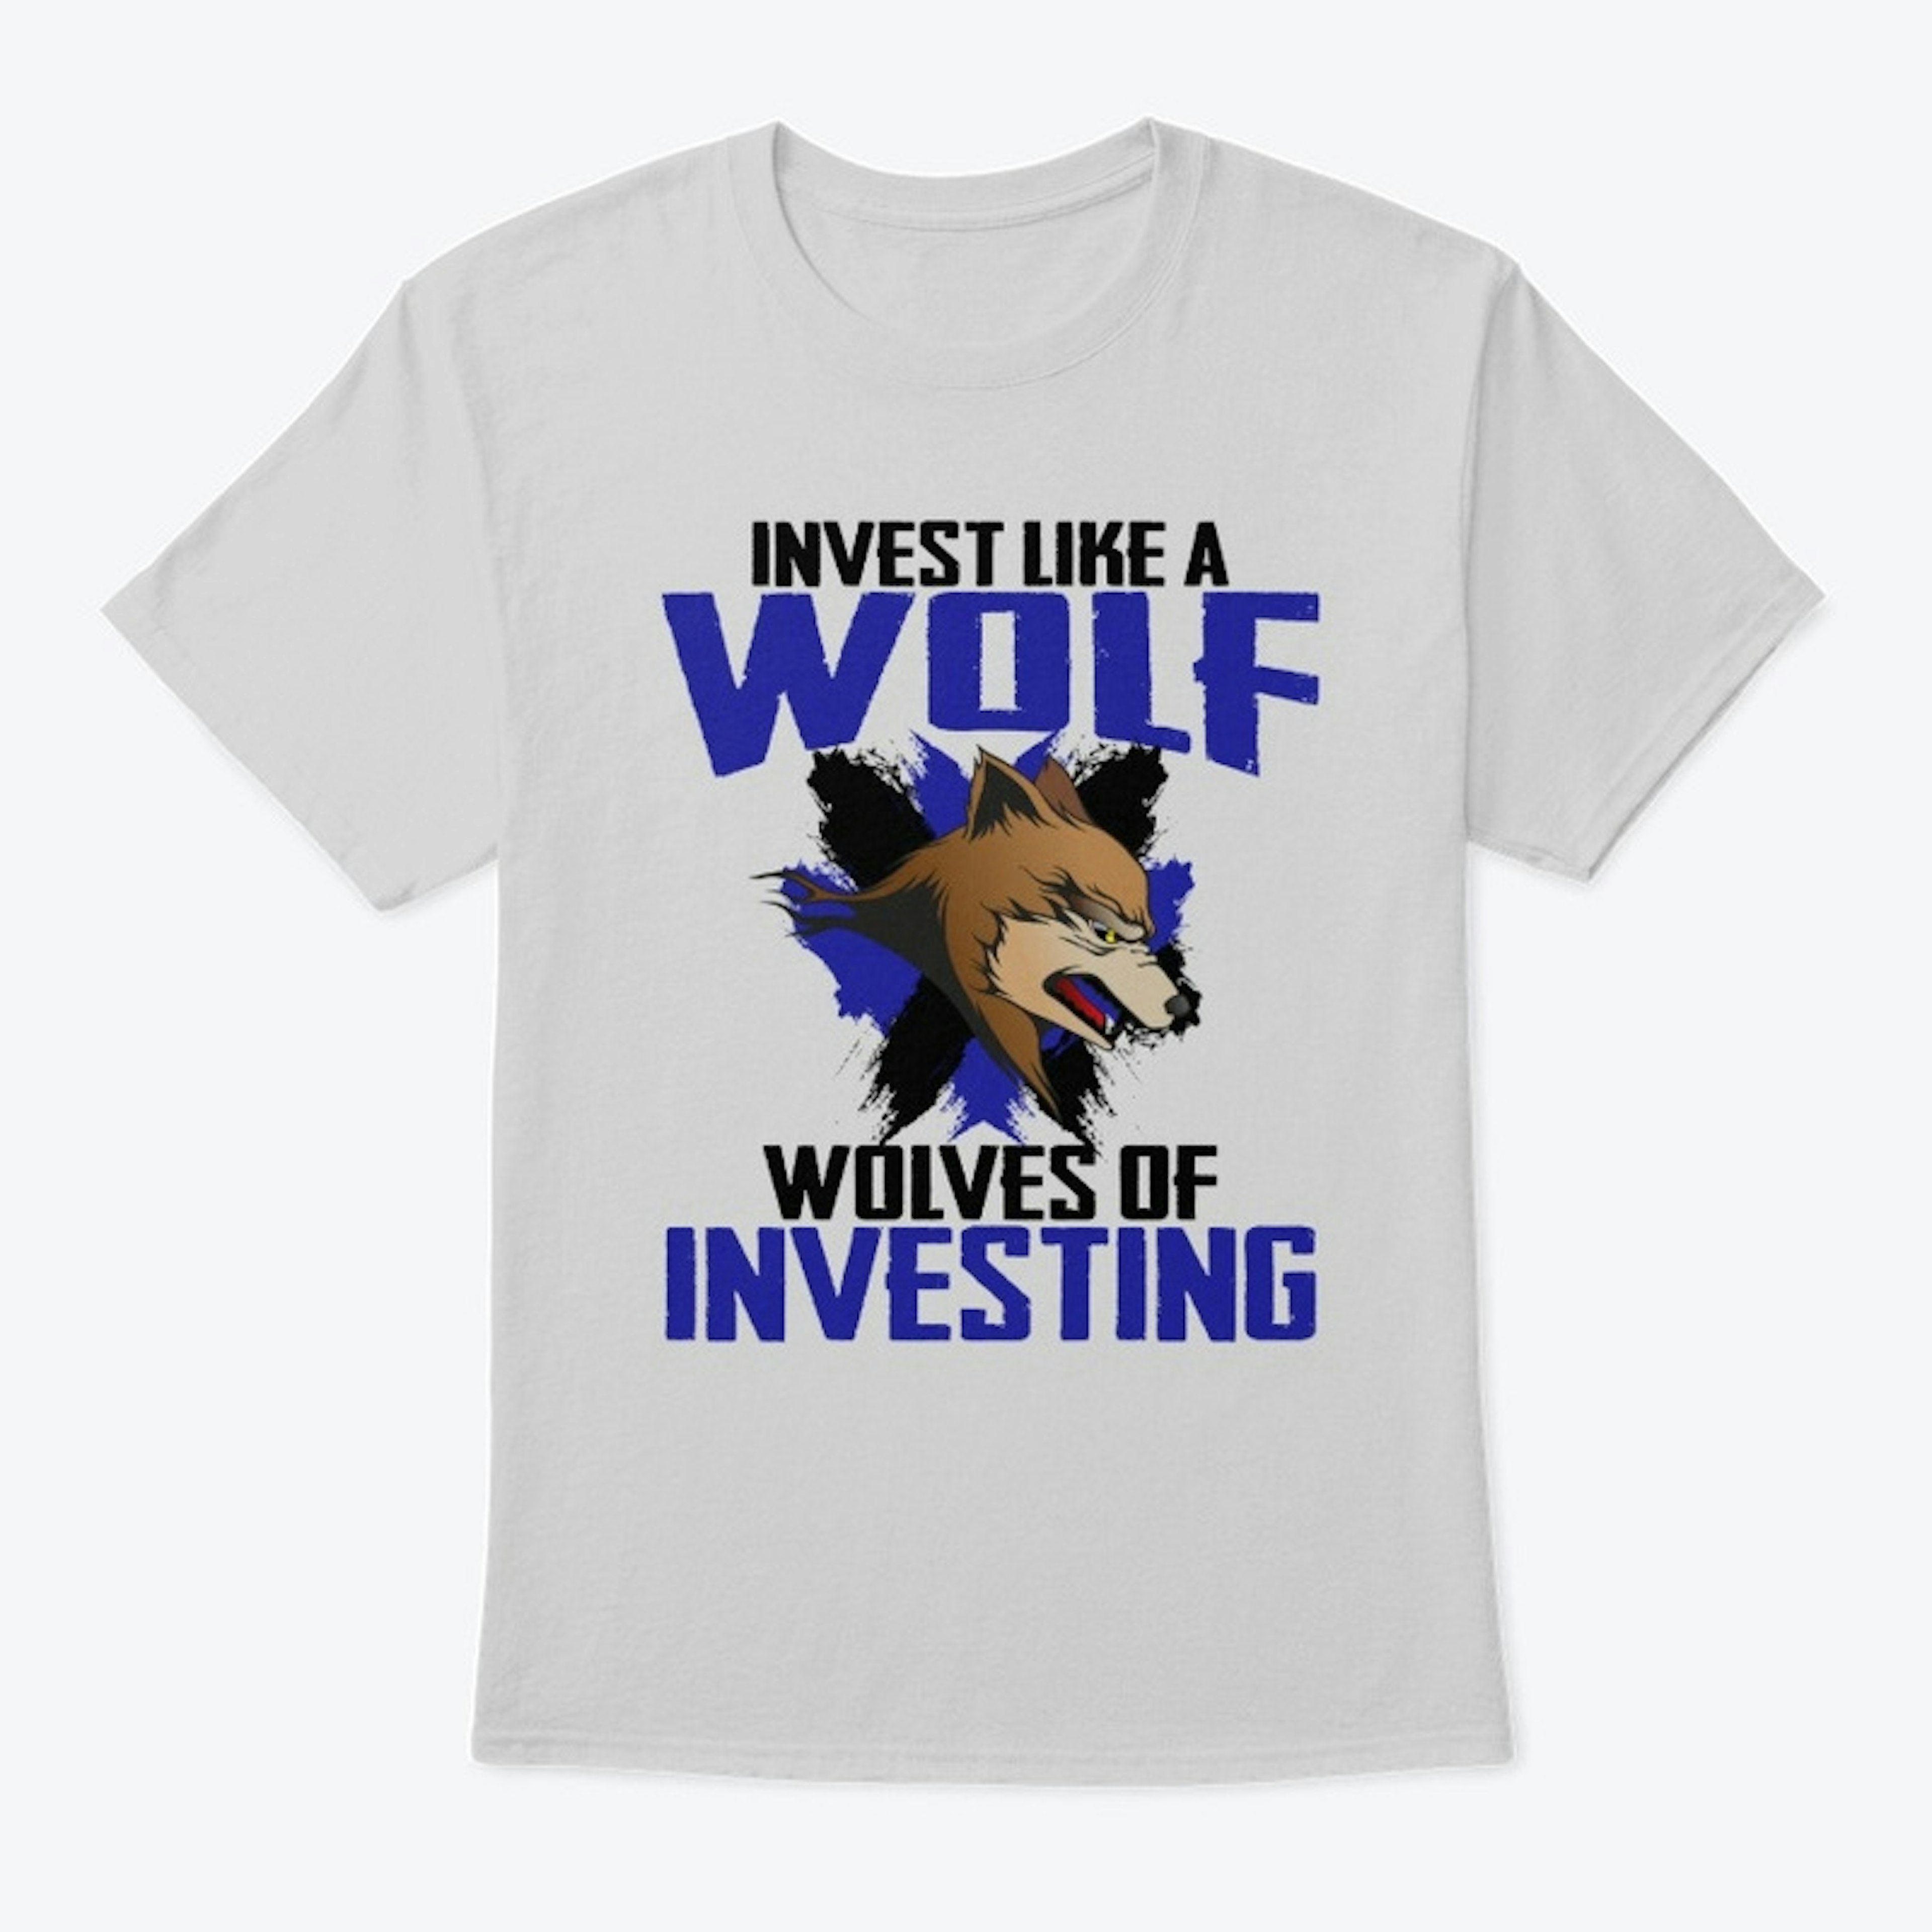 Invest Like A Wolf (Black)